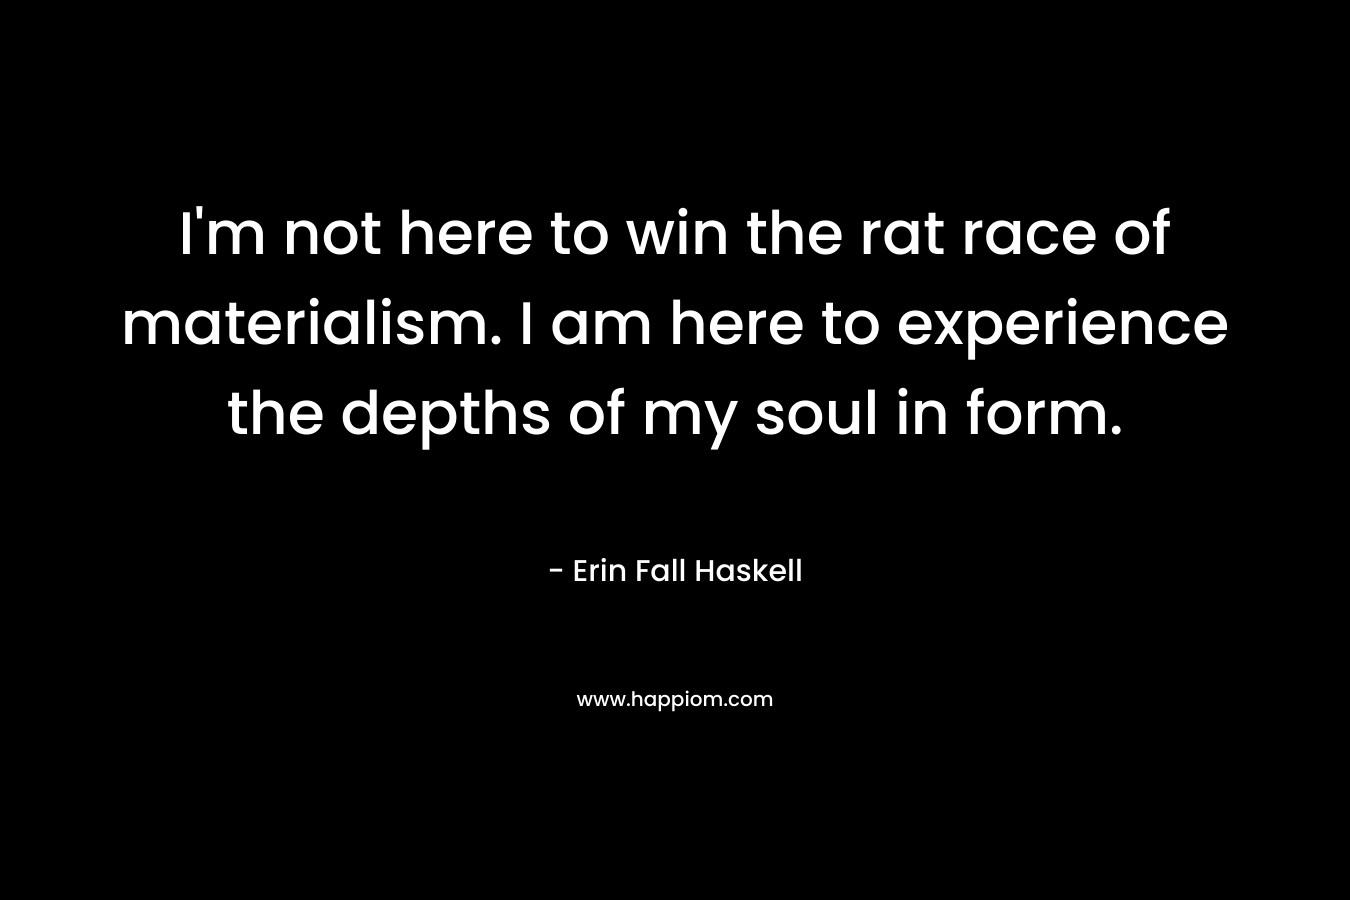 I’m not here to win the rat race of materialism. I am here to experience the depths of my soul in form. – Erin Fall Haskell